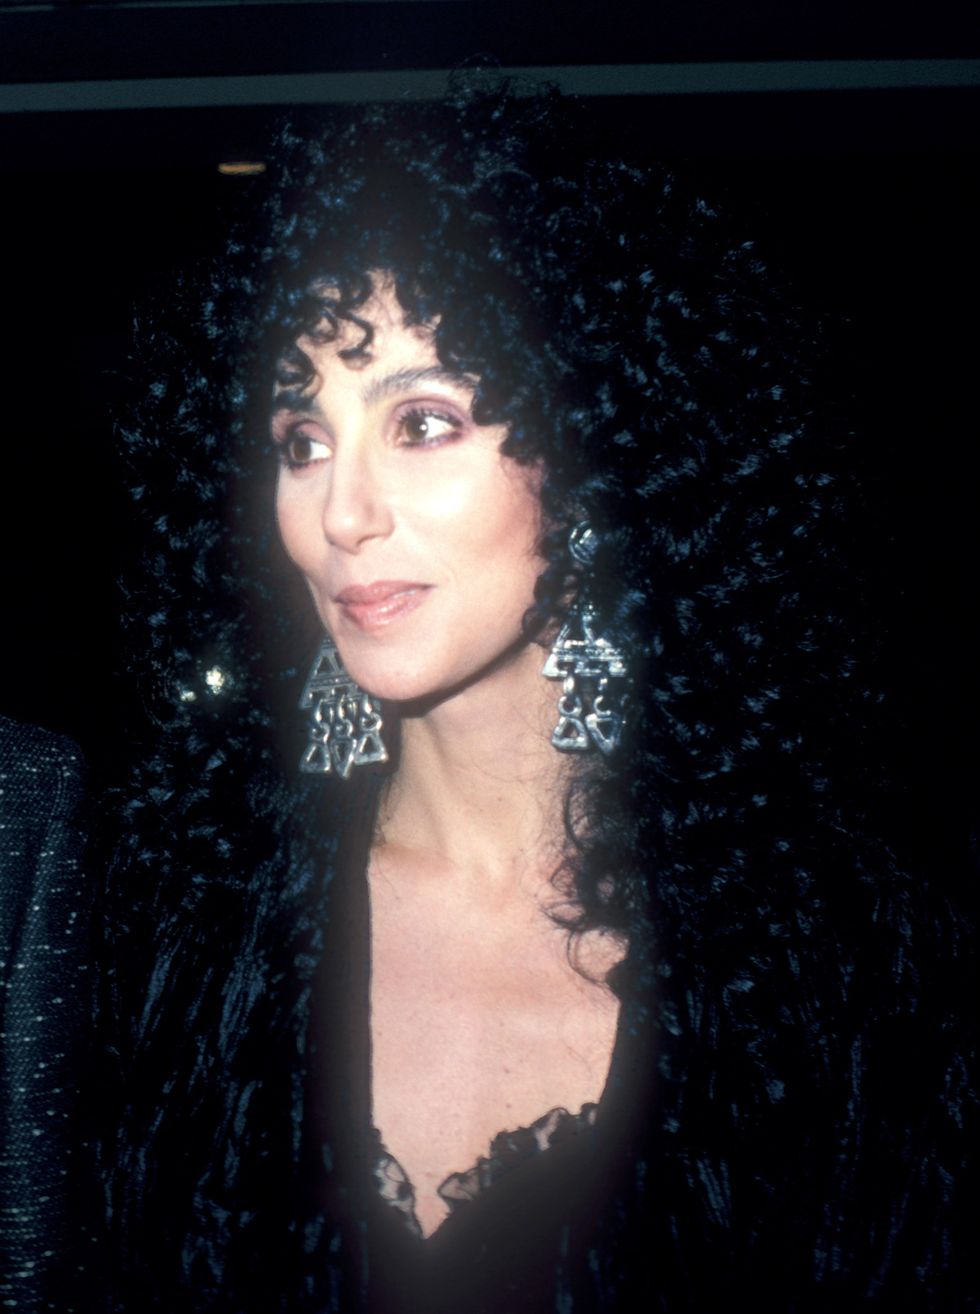 Cher's Best Acting Roles and Movies Ranked